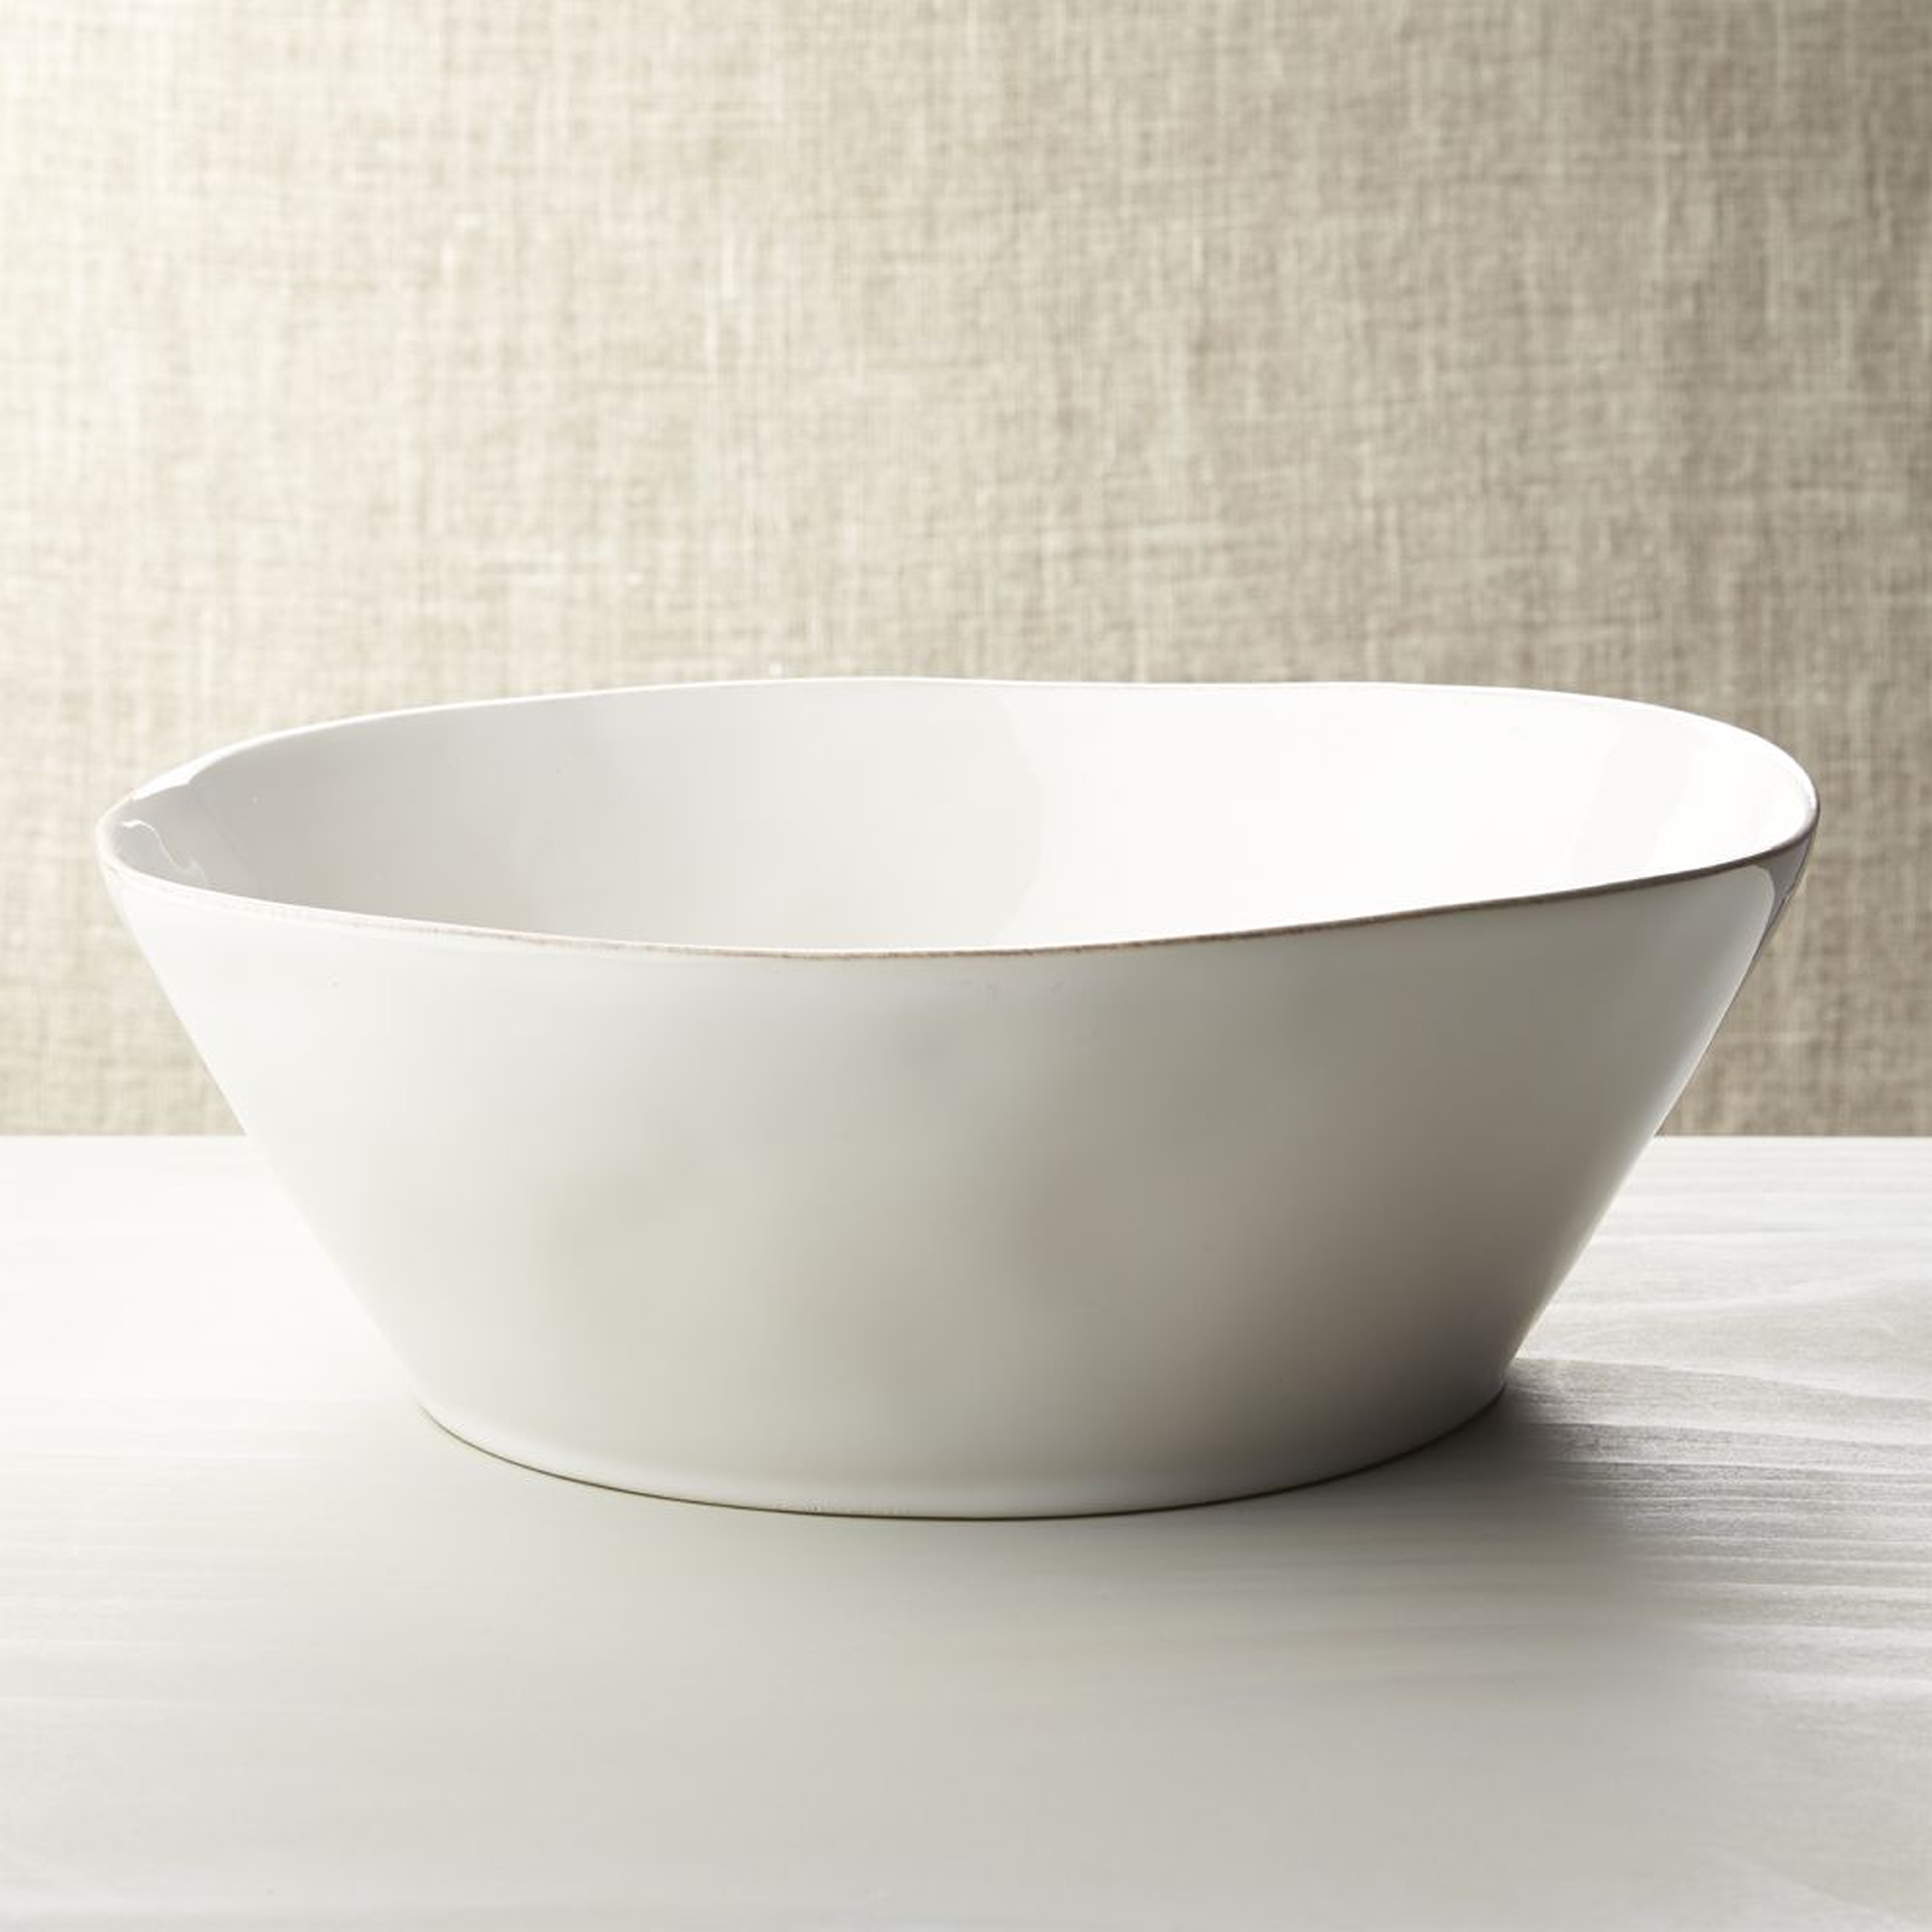 Marin White Large Serving Bowl - Crate and Barrel